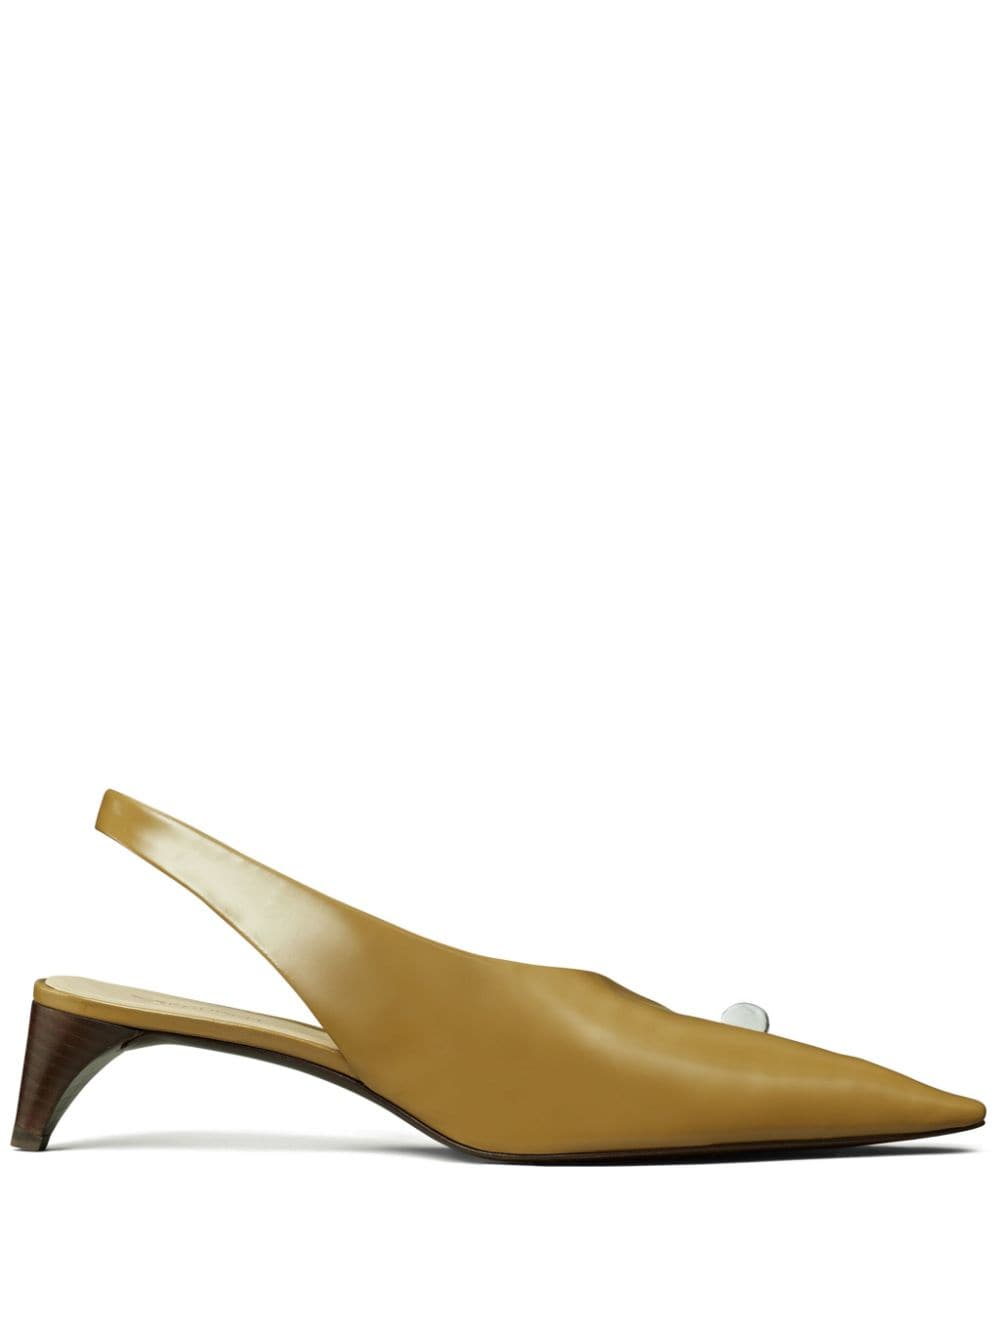 Image 1 of Tory Burch Pierced 45mm leather pumps